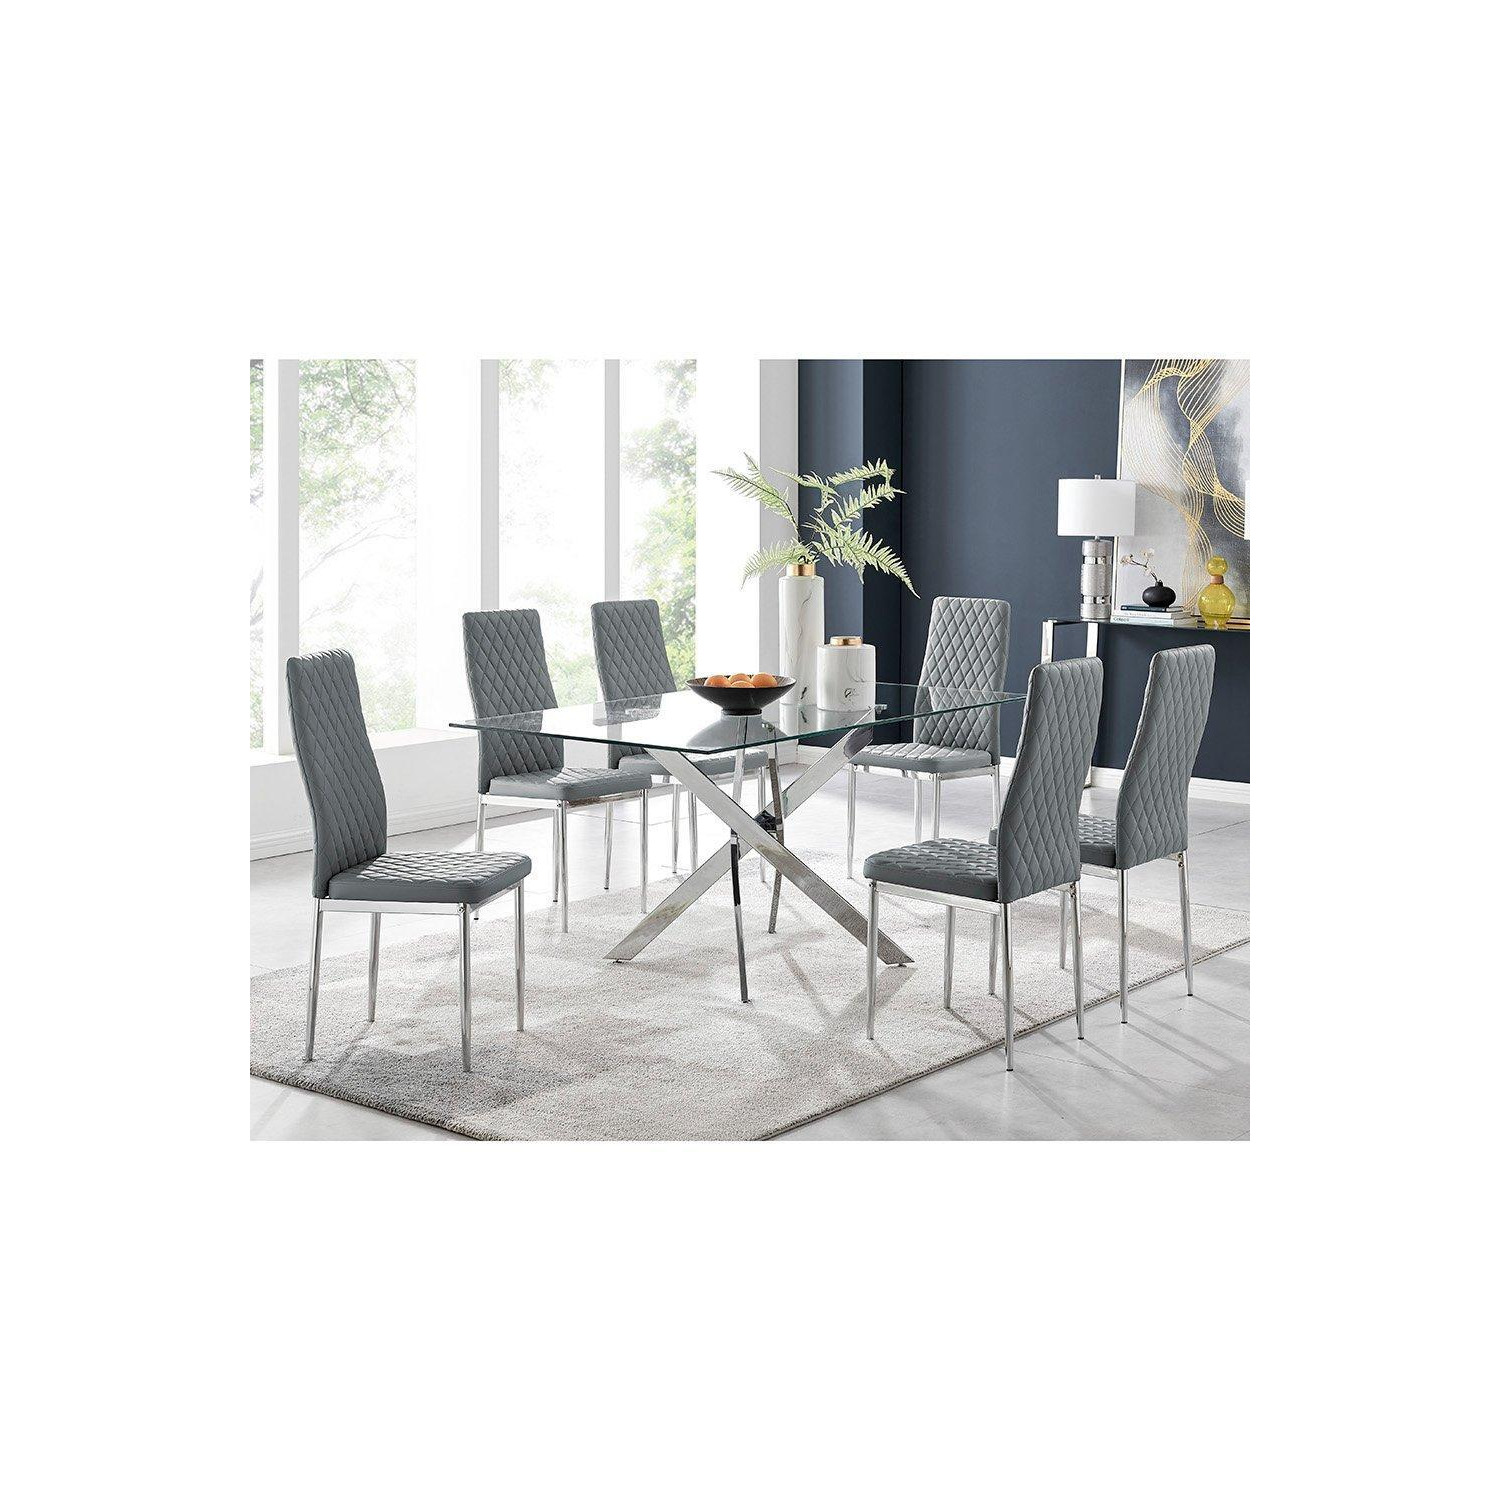 Leonardo Glass And Chrome Metal Dining Table And 6 Milan Chairs Dining Set - image 1